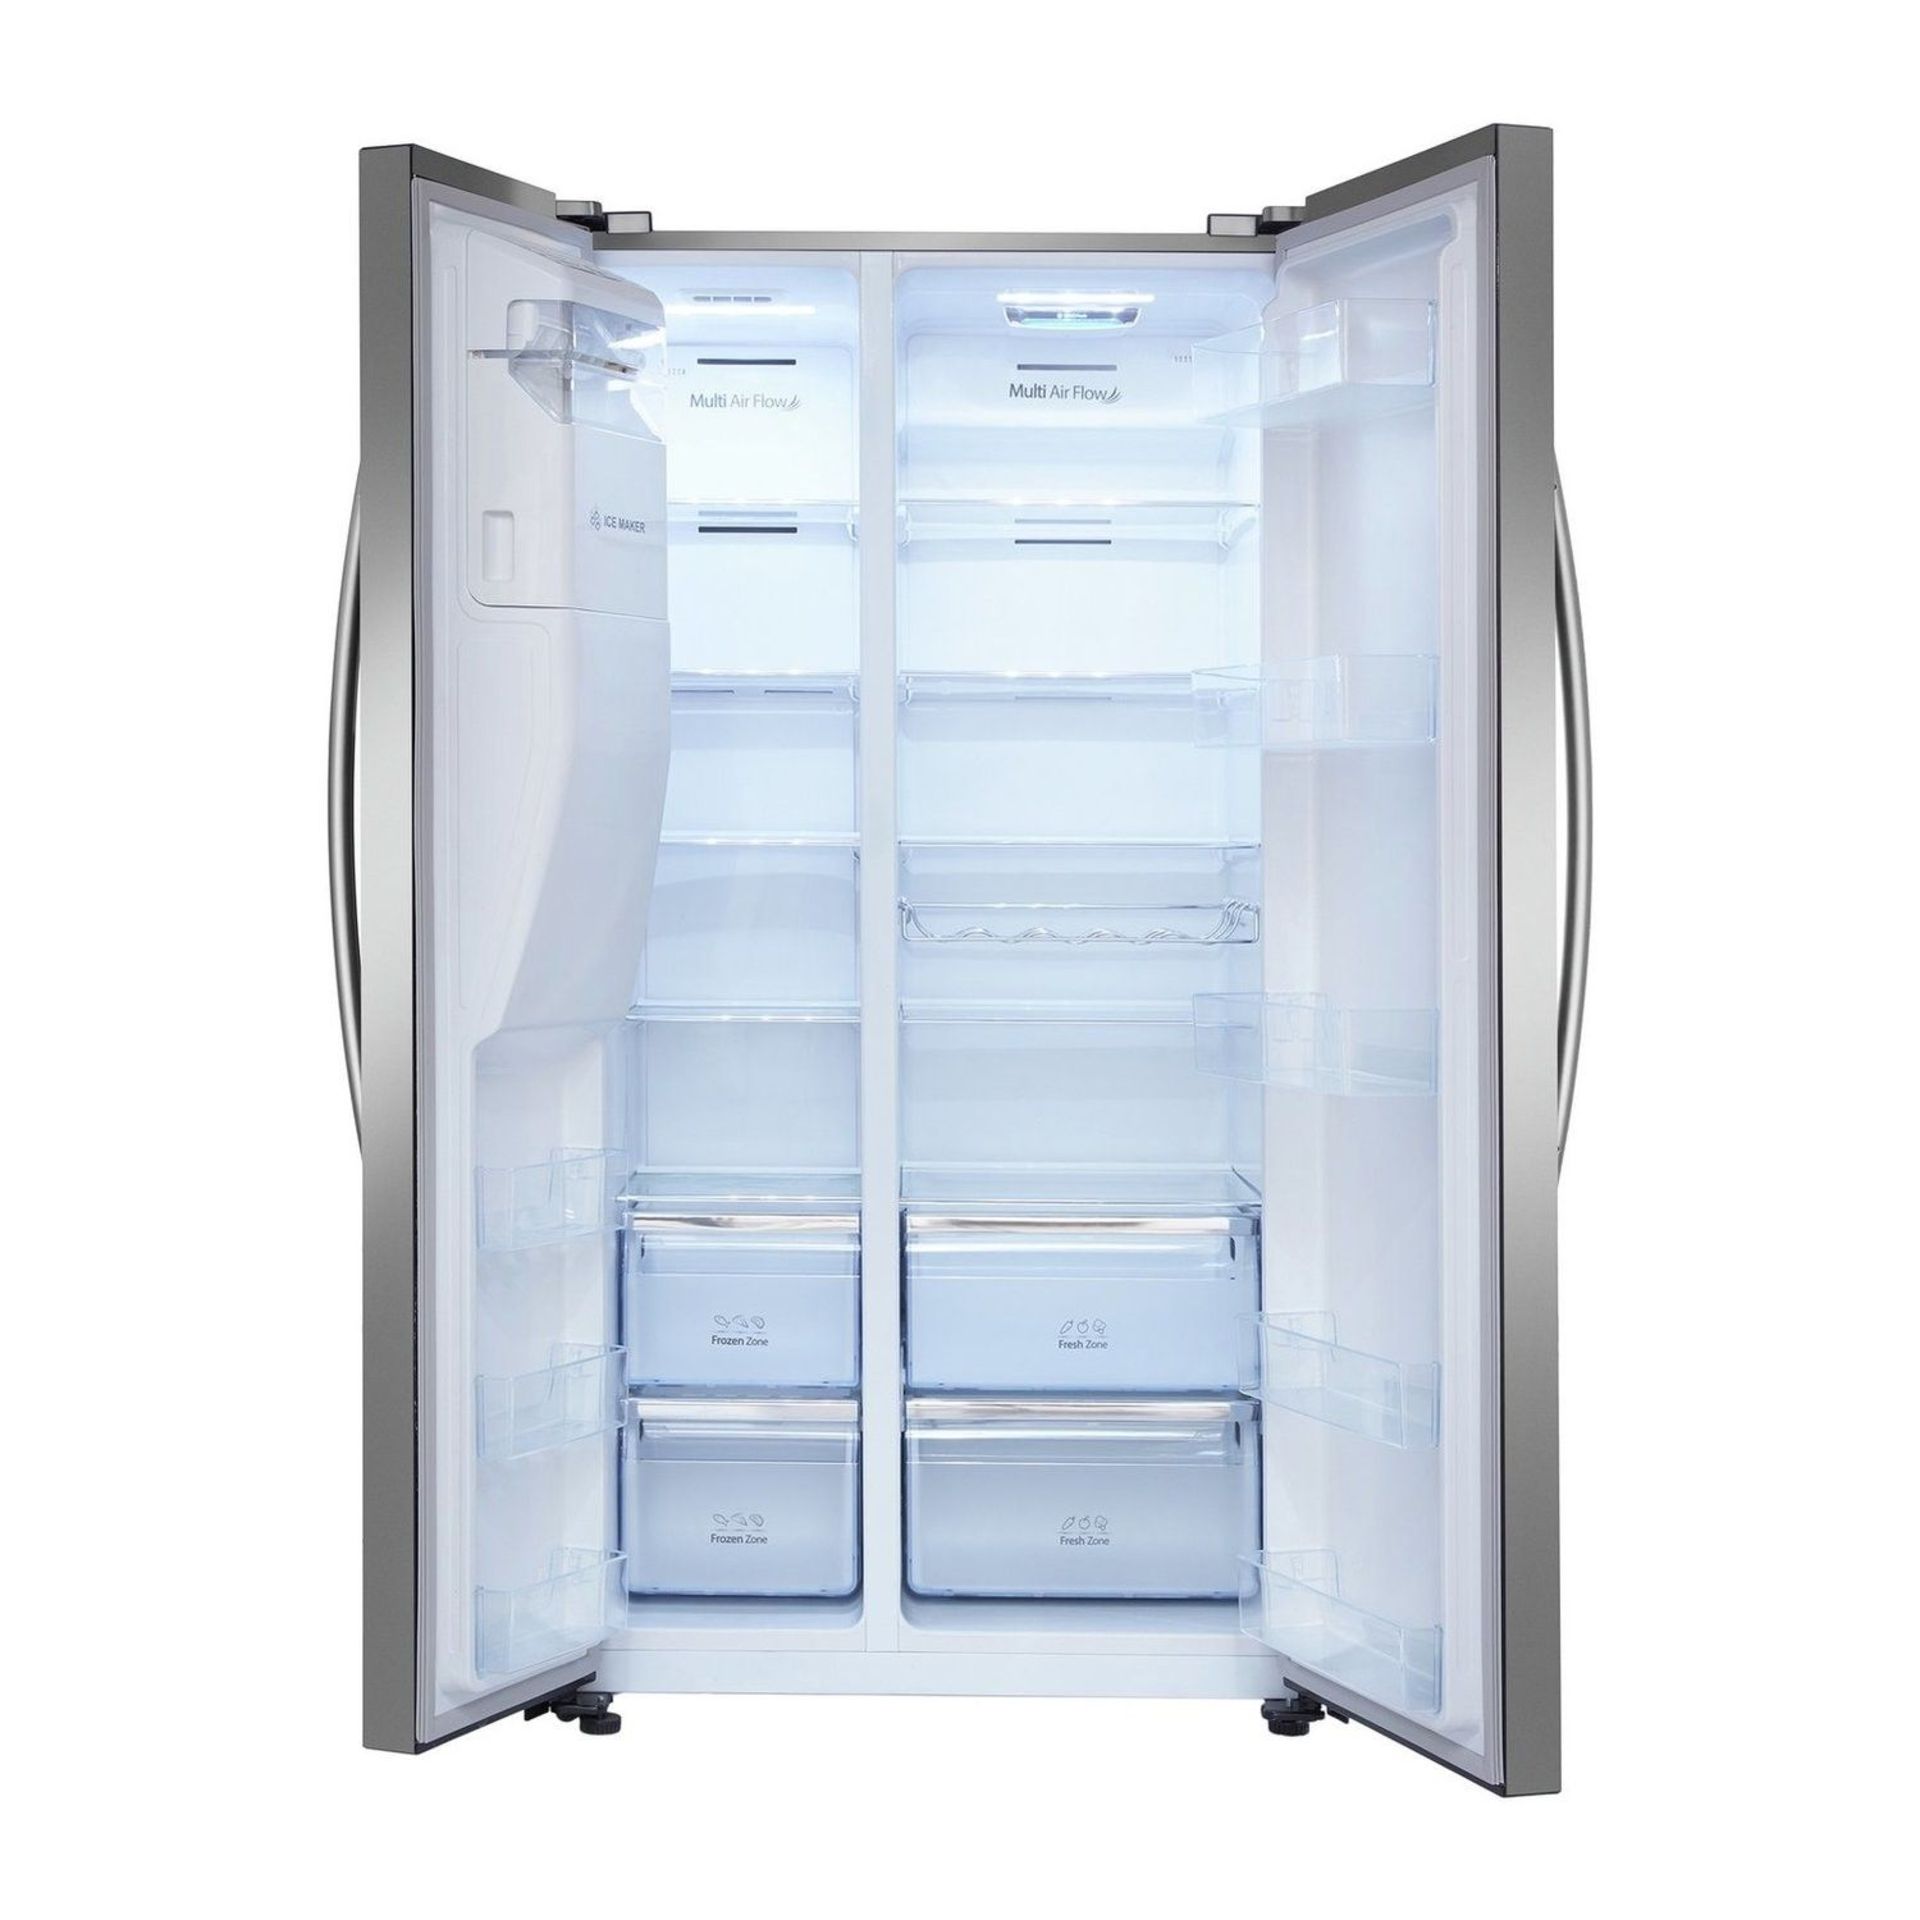 Hisense RS696N4IC1 Side-by-side American Fridge Freezer. - RRP £939.00. Featuring the iconic side- - Image 2 of 3